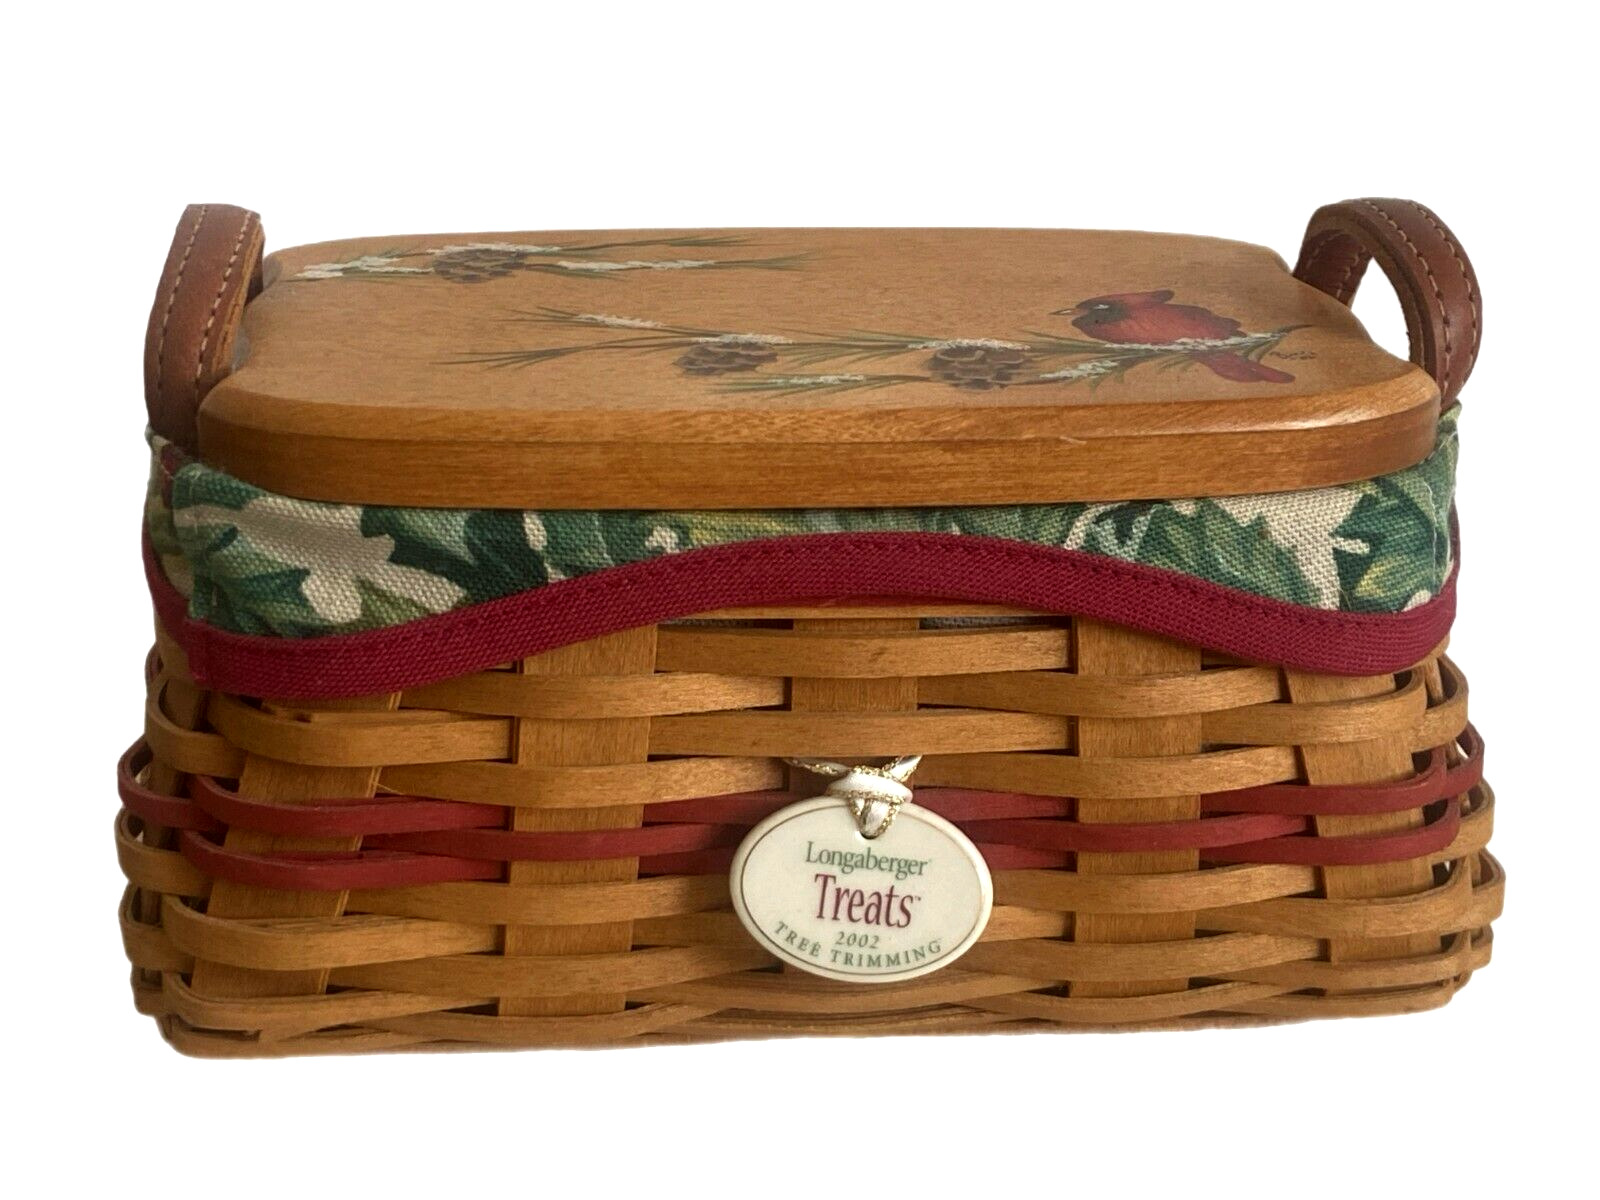 Longaberger Tree Trimming Collection Treats Basket Hand Painted Lid & Tie-on